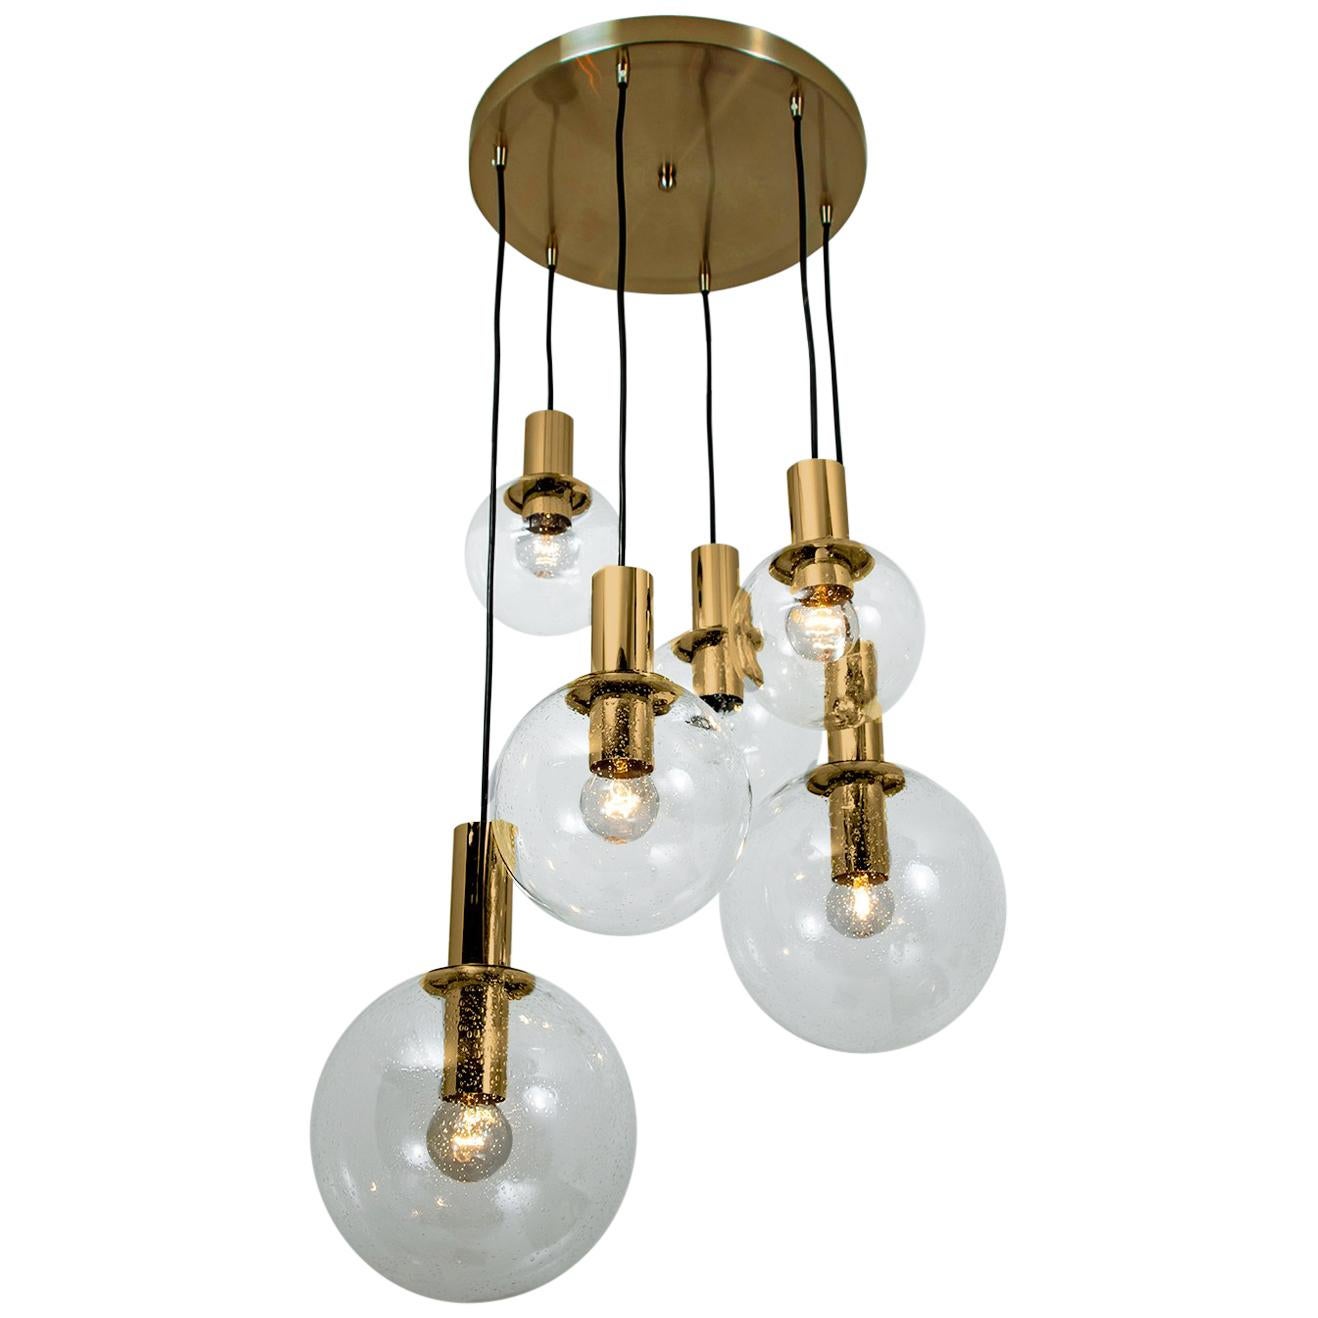 Amazing huge ceiling mount pendant light fixture with six globes or spheres in different sizes by Limburg Glashütte. High-end piece with hand blown spheres. 

The hand blown glass has small air bubbles in it, what gives a nice diffuse light effect